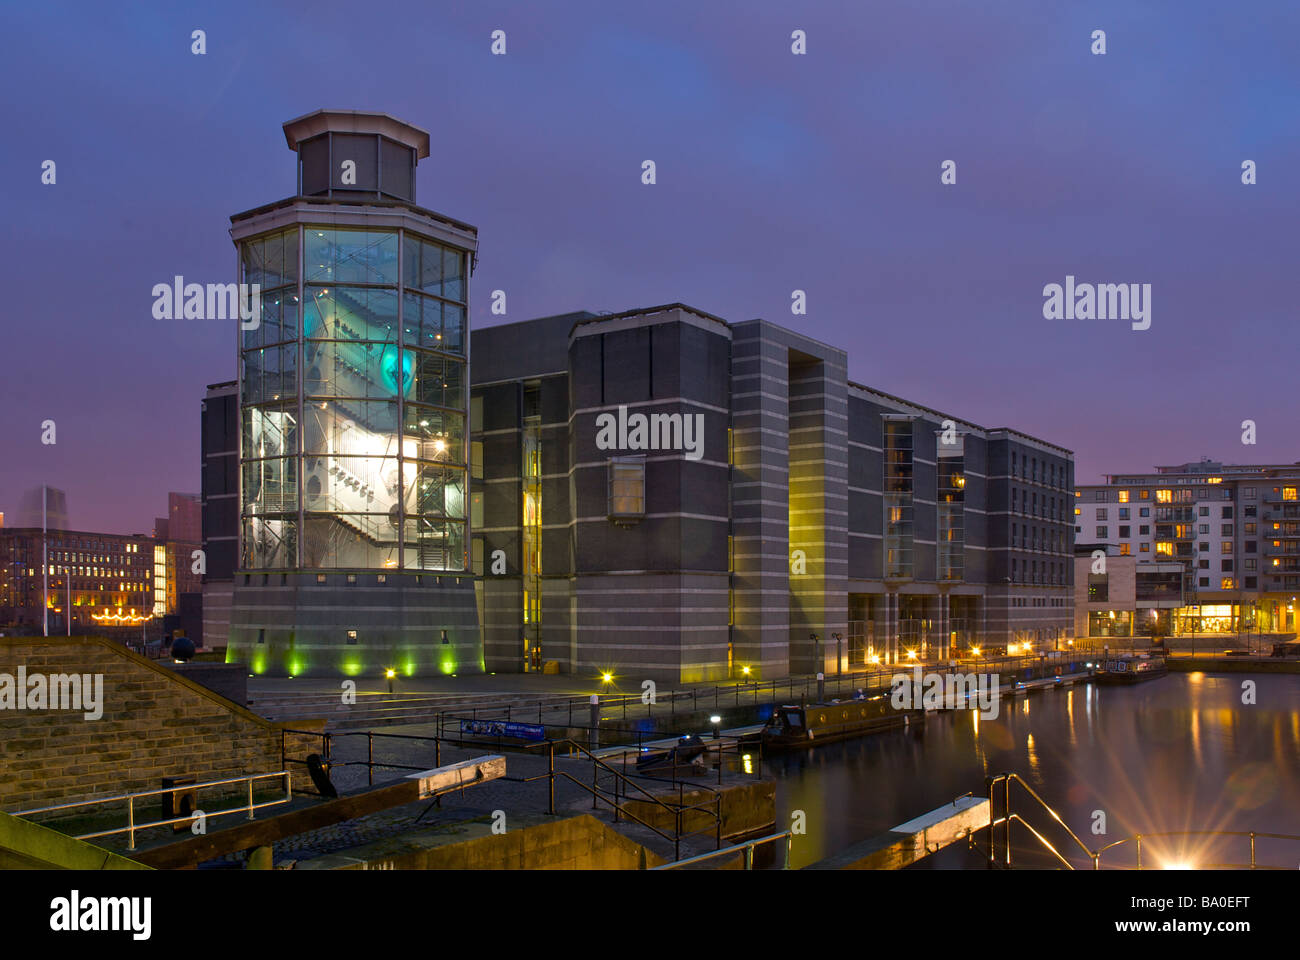 Il Royal Armouries Museum al crepuscolo, Clarence Dock, Leeds, West Yorkshire, Inghilterra, Regno Unito Foto Stock